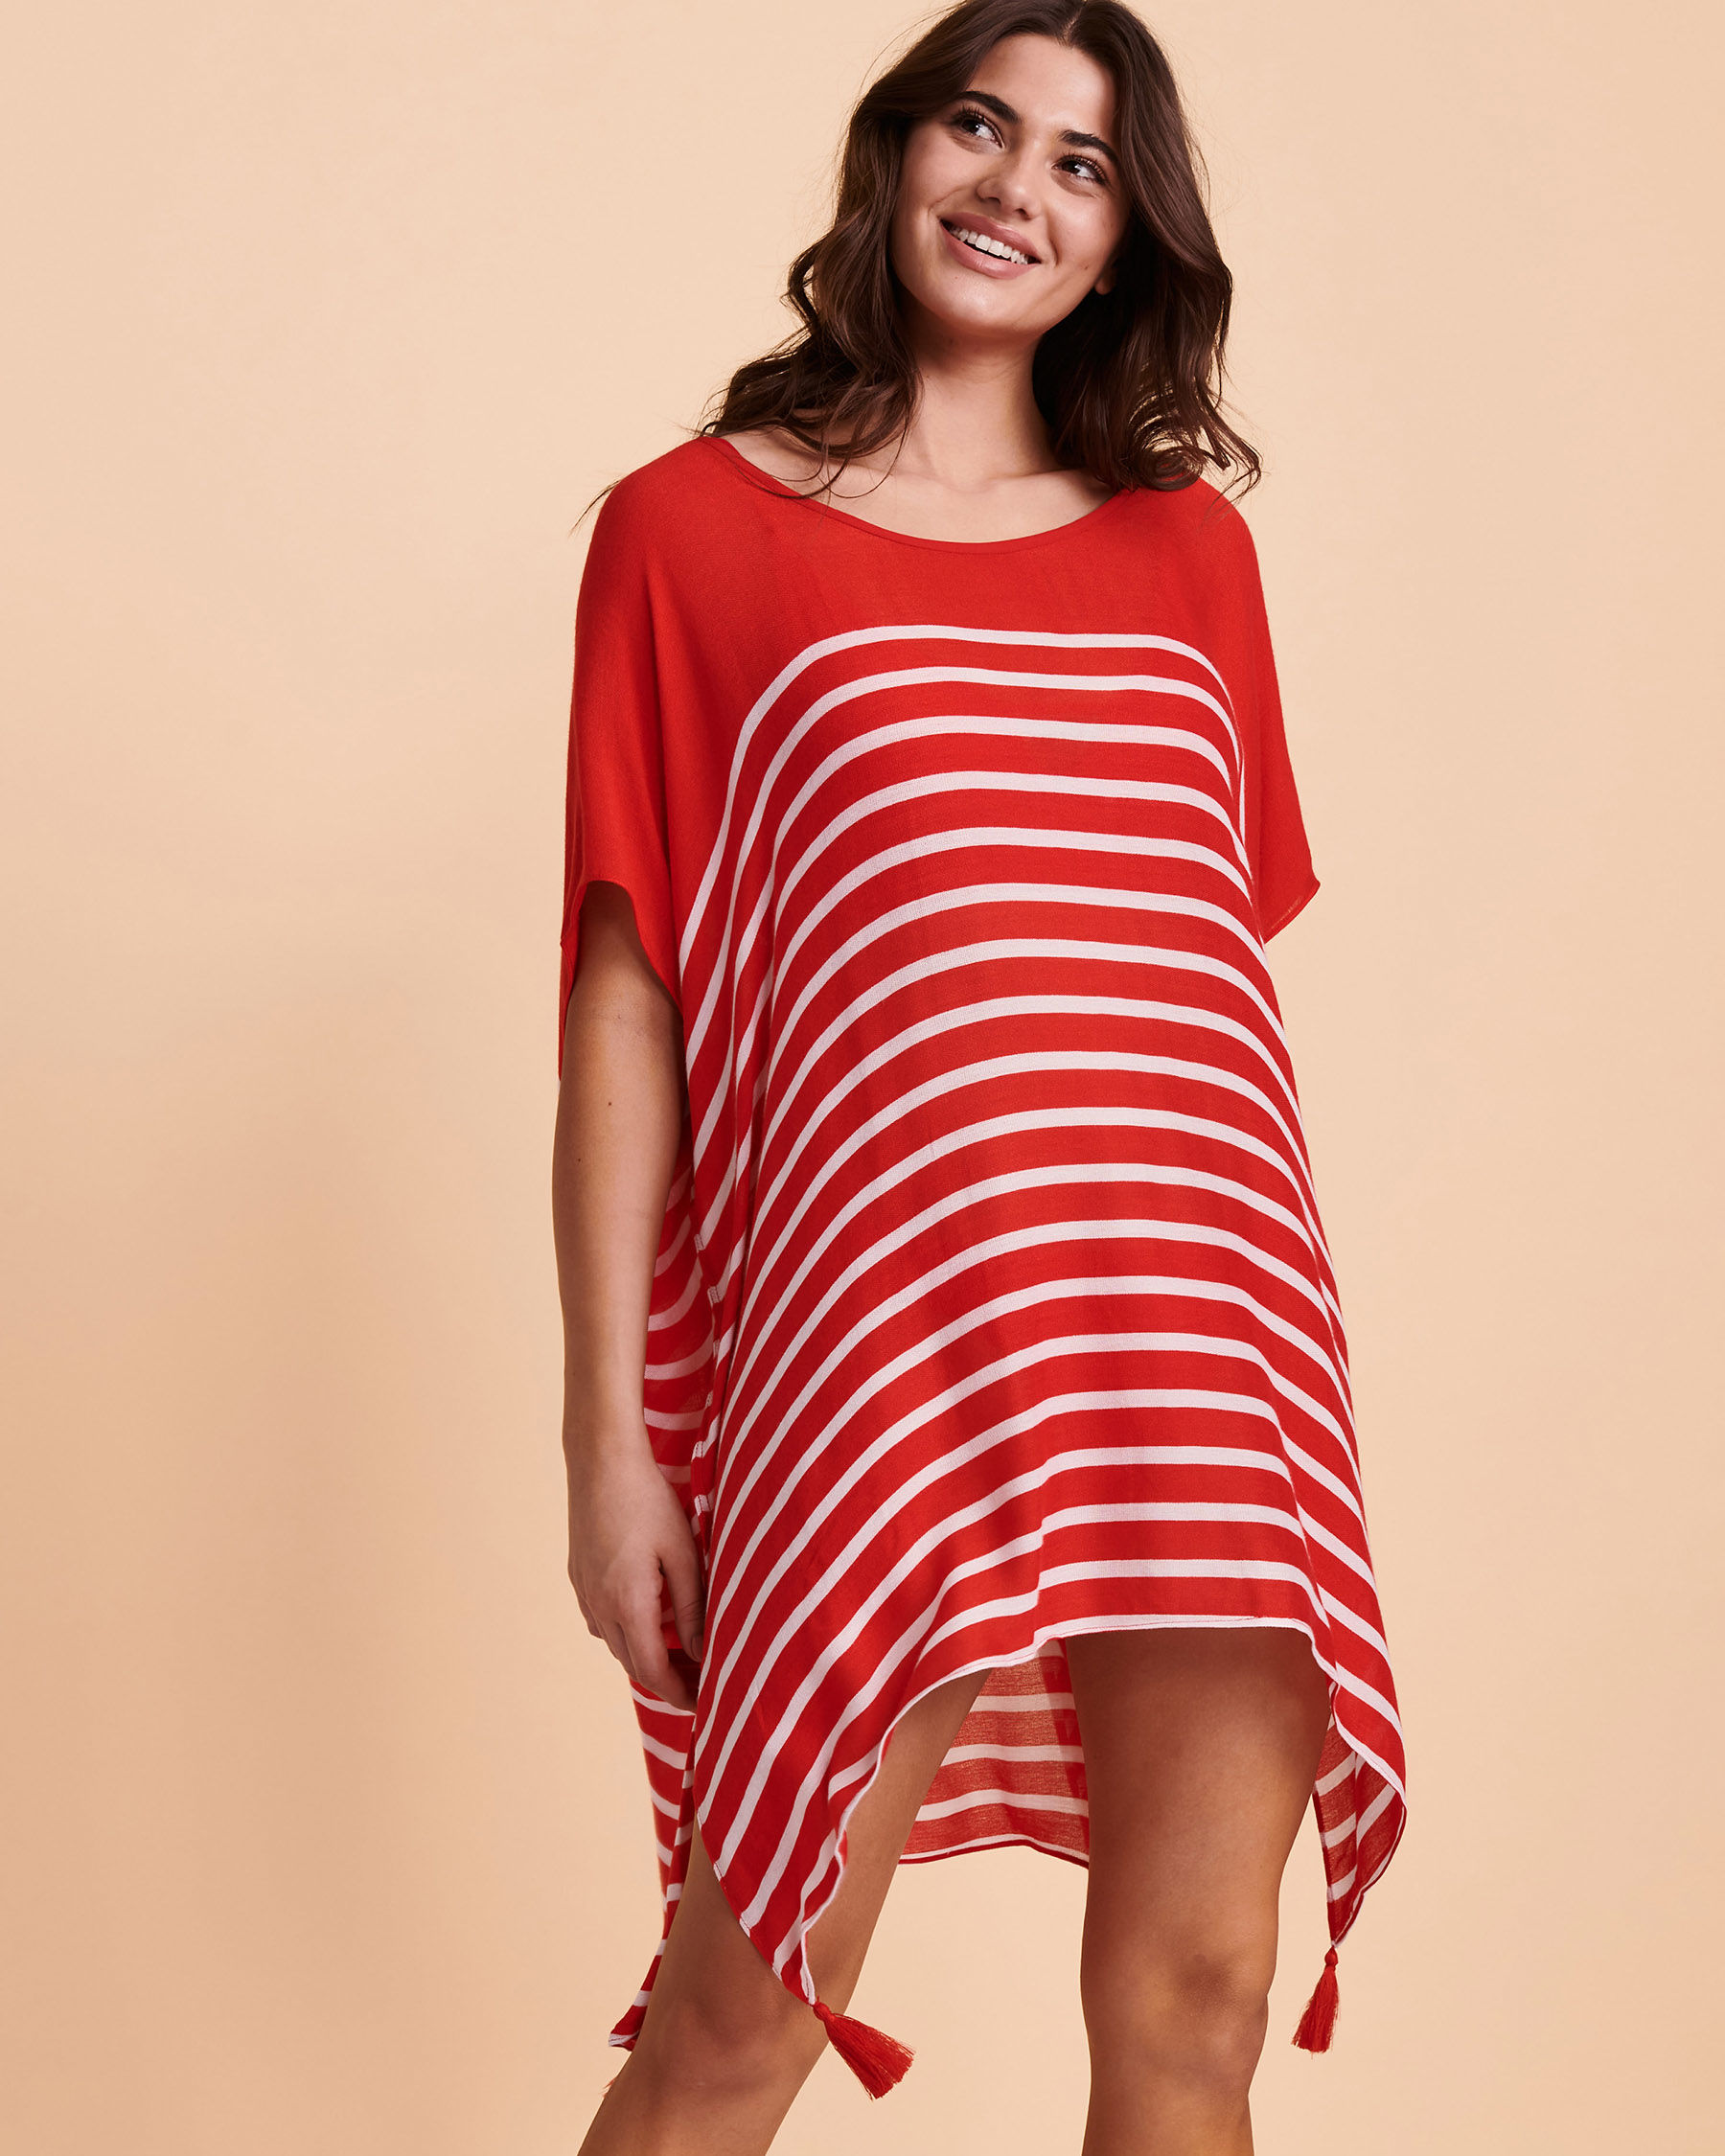 BODY GLOVE AJANA Nautical Loose Dress Red and stripes 39456622 - View1